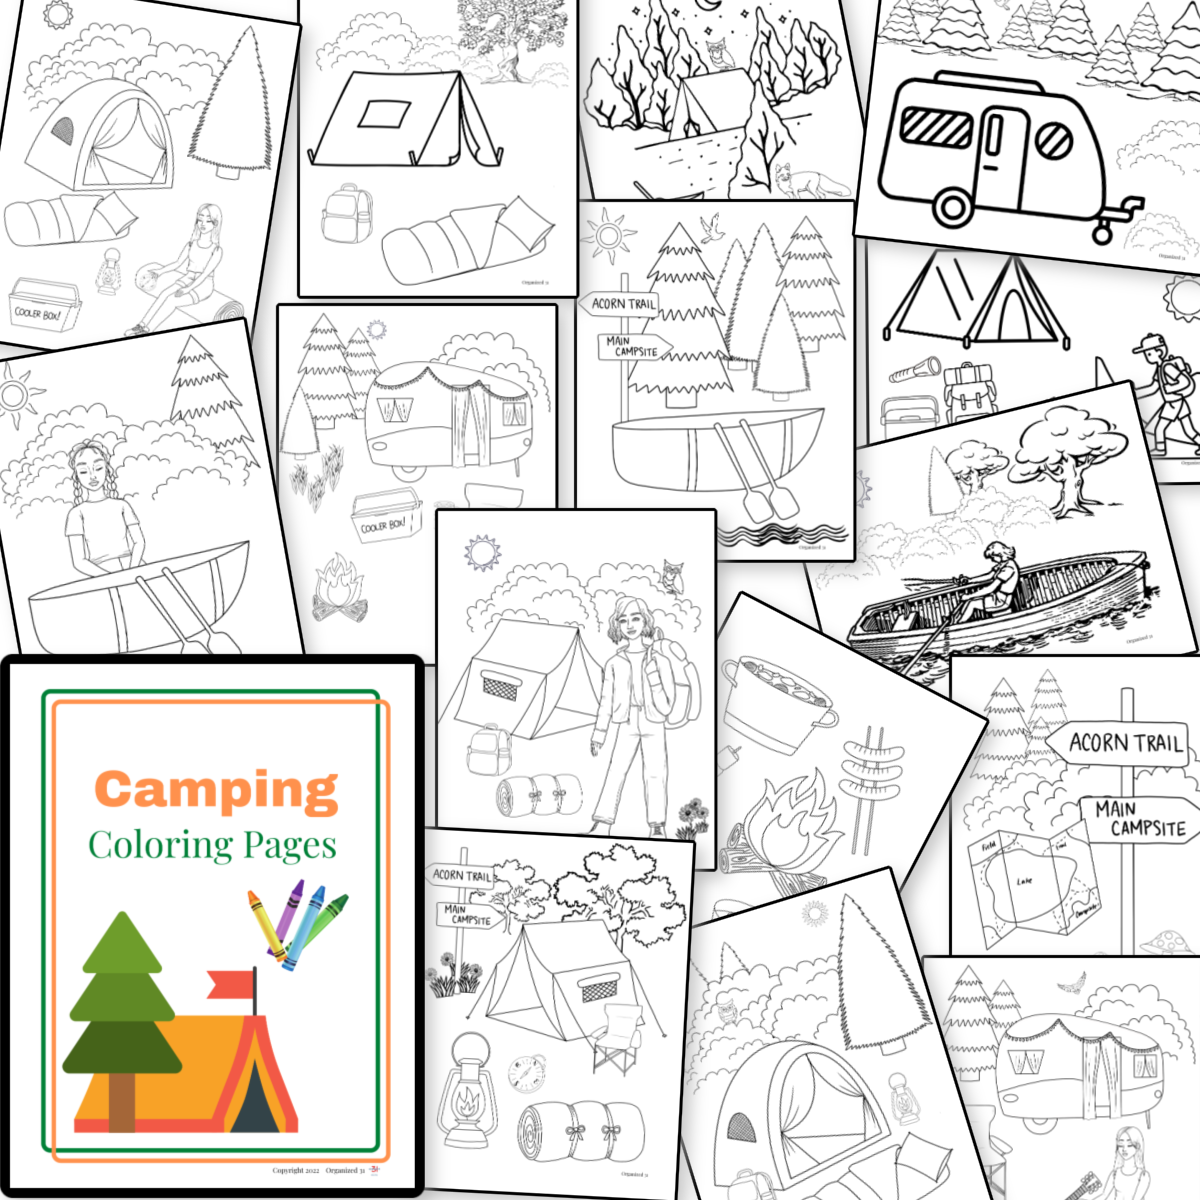 A collection of Fun Camping Coloring Pages from Organized 31 Shop.
